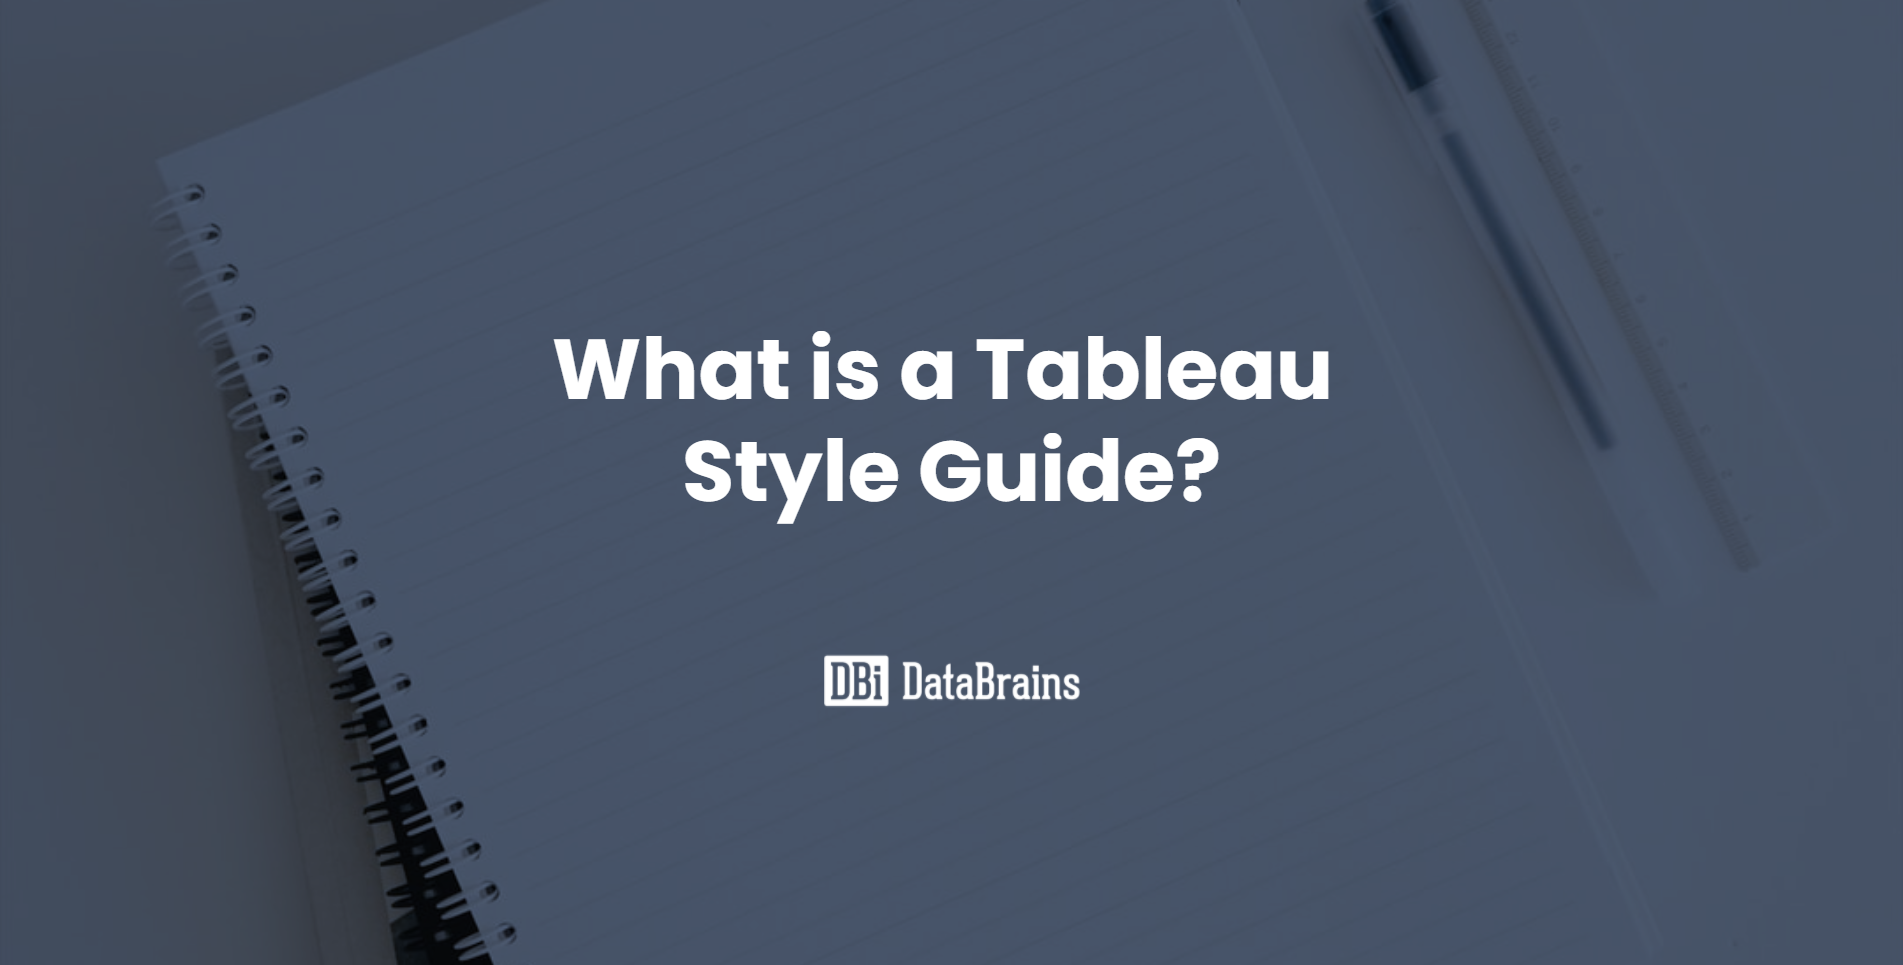 What is a Tableau Style Guide?